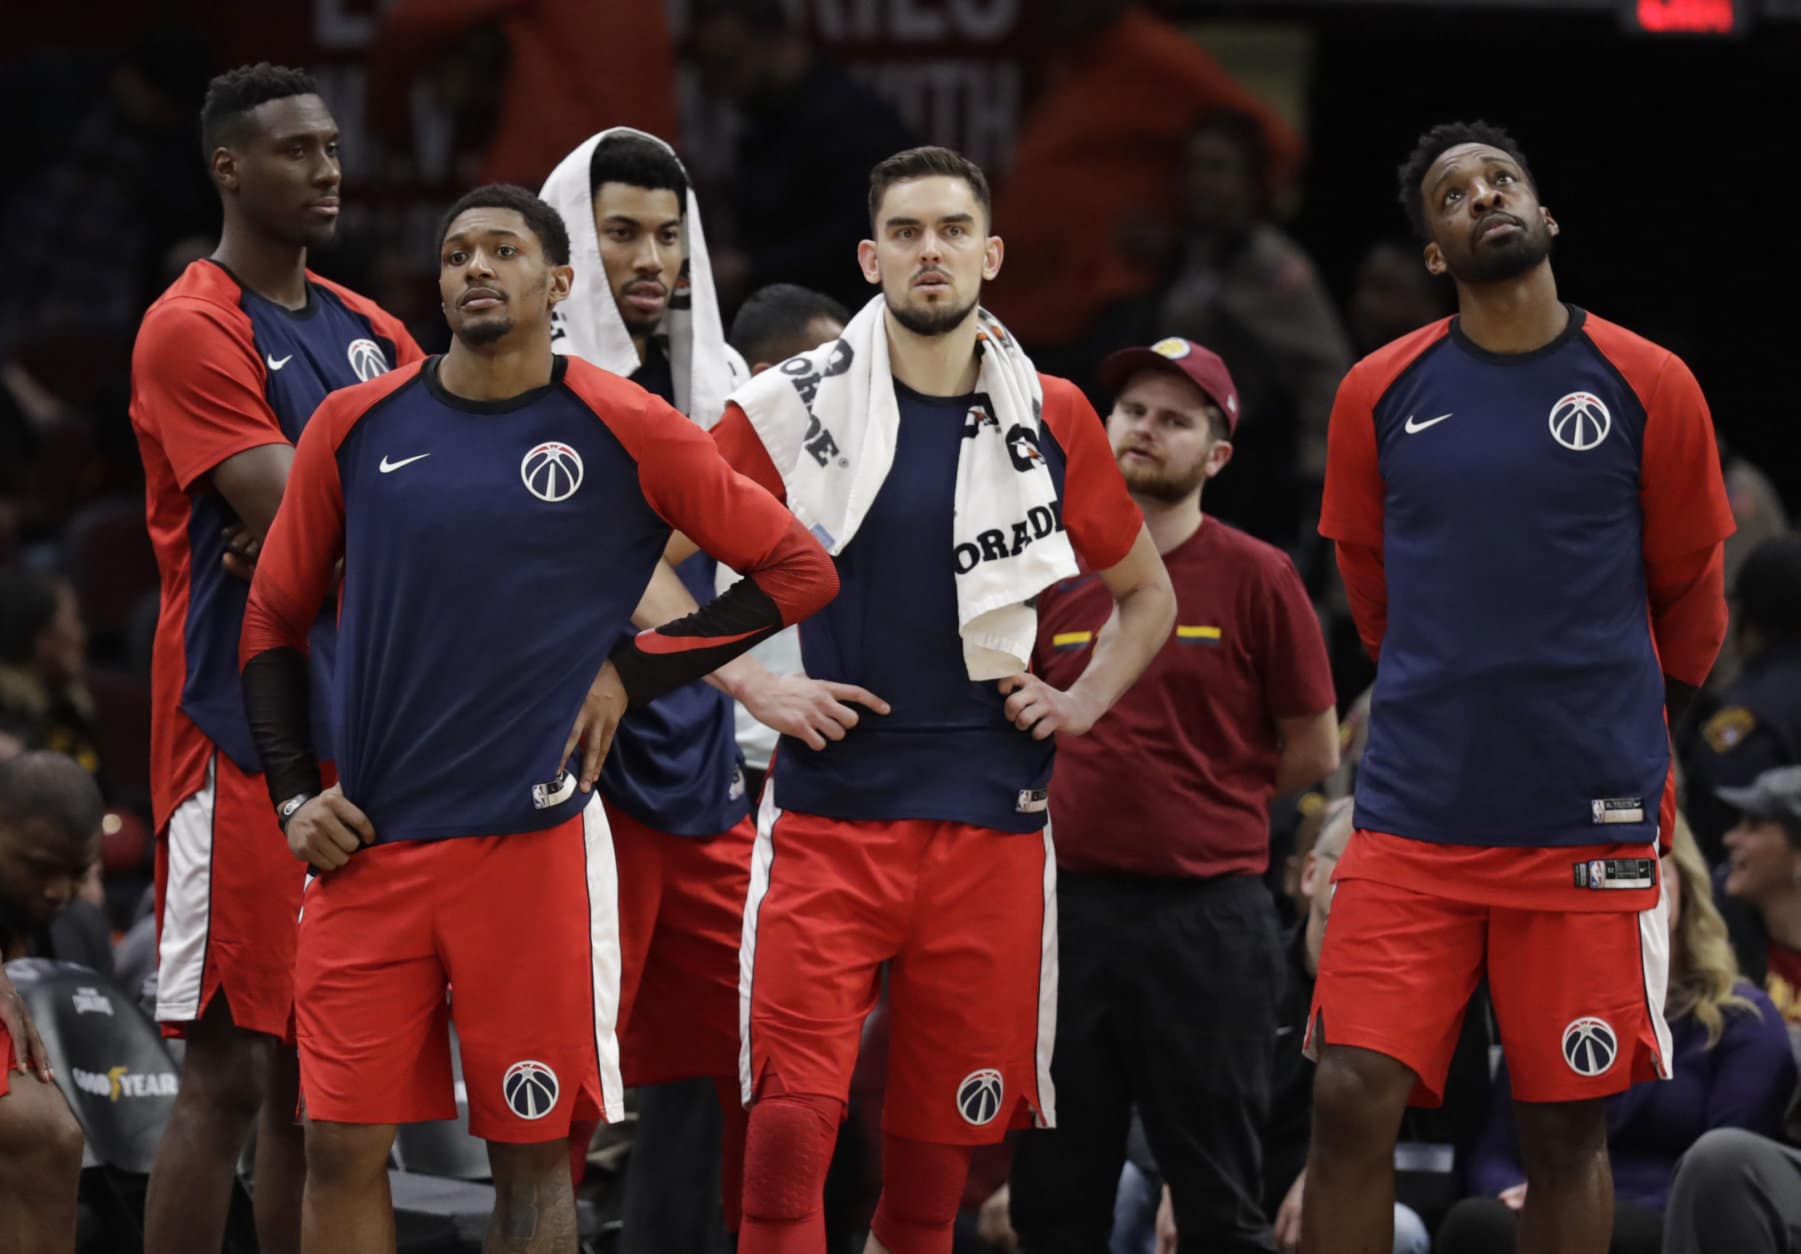 The Washington Wizards bench watches late in the second half of an NBA basketball game against the Cleveland Cavaliers, Tuesday, Jan. 29, 2019, in Cleveland. (AP Photo/Tony Dejak)